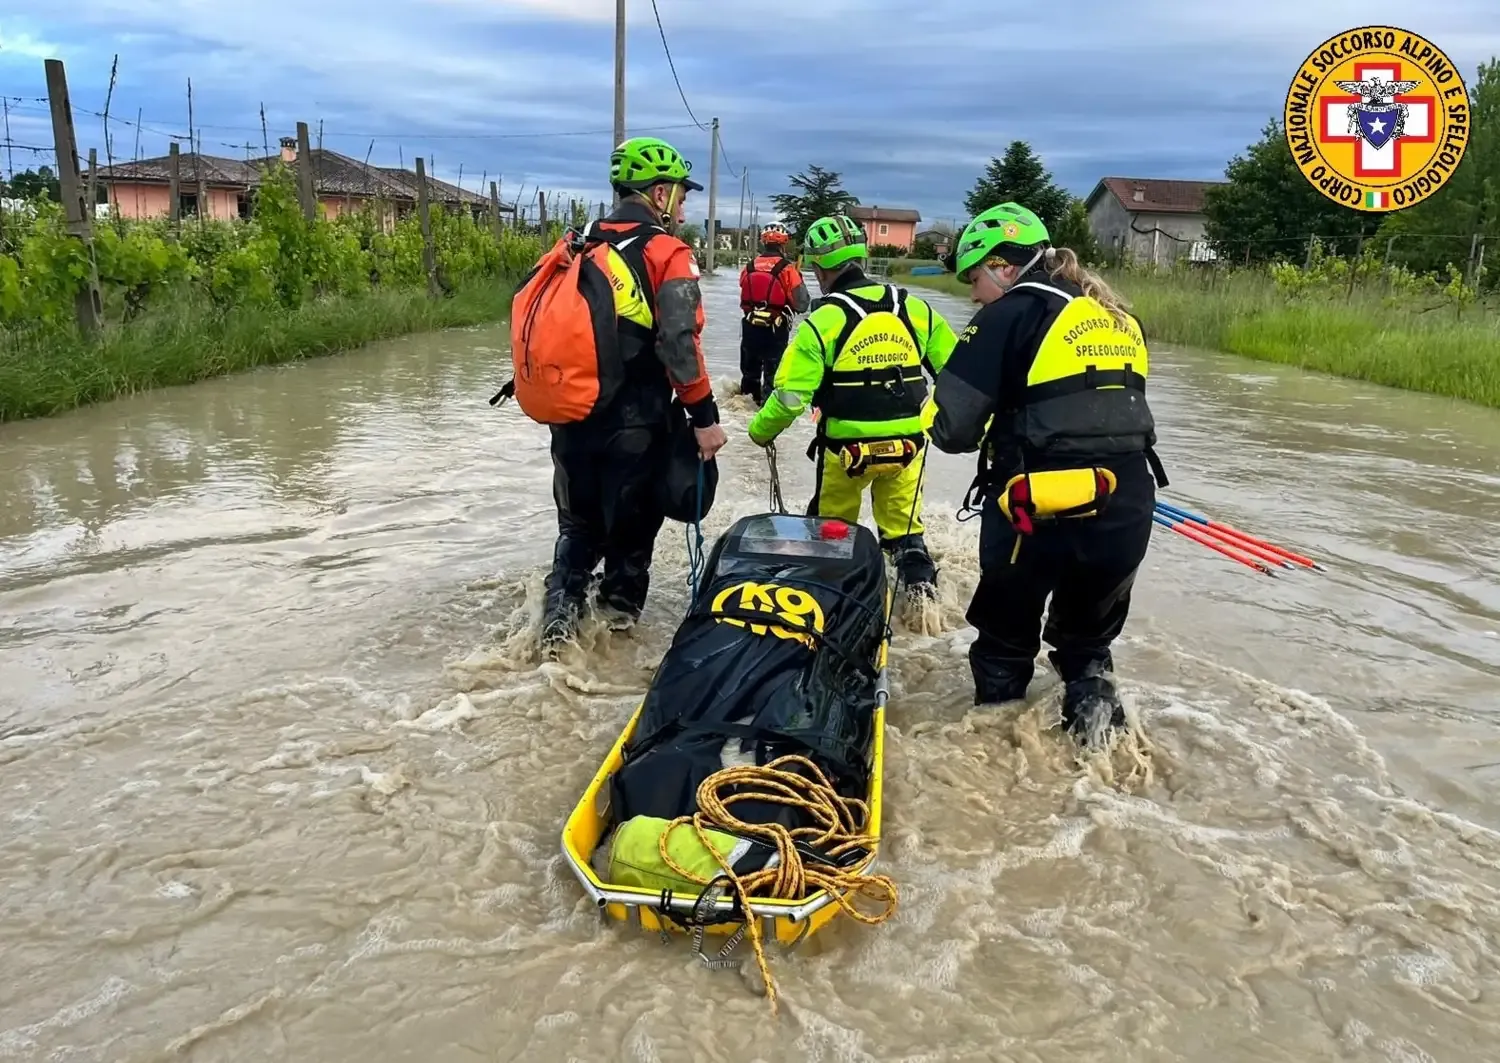 Three rescue workers drag a stretcher through a flooded street